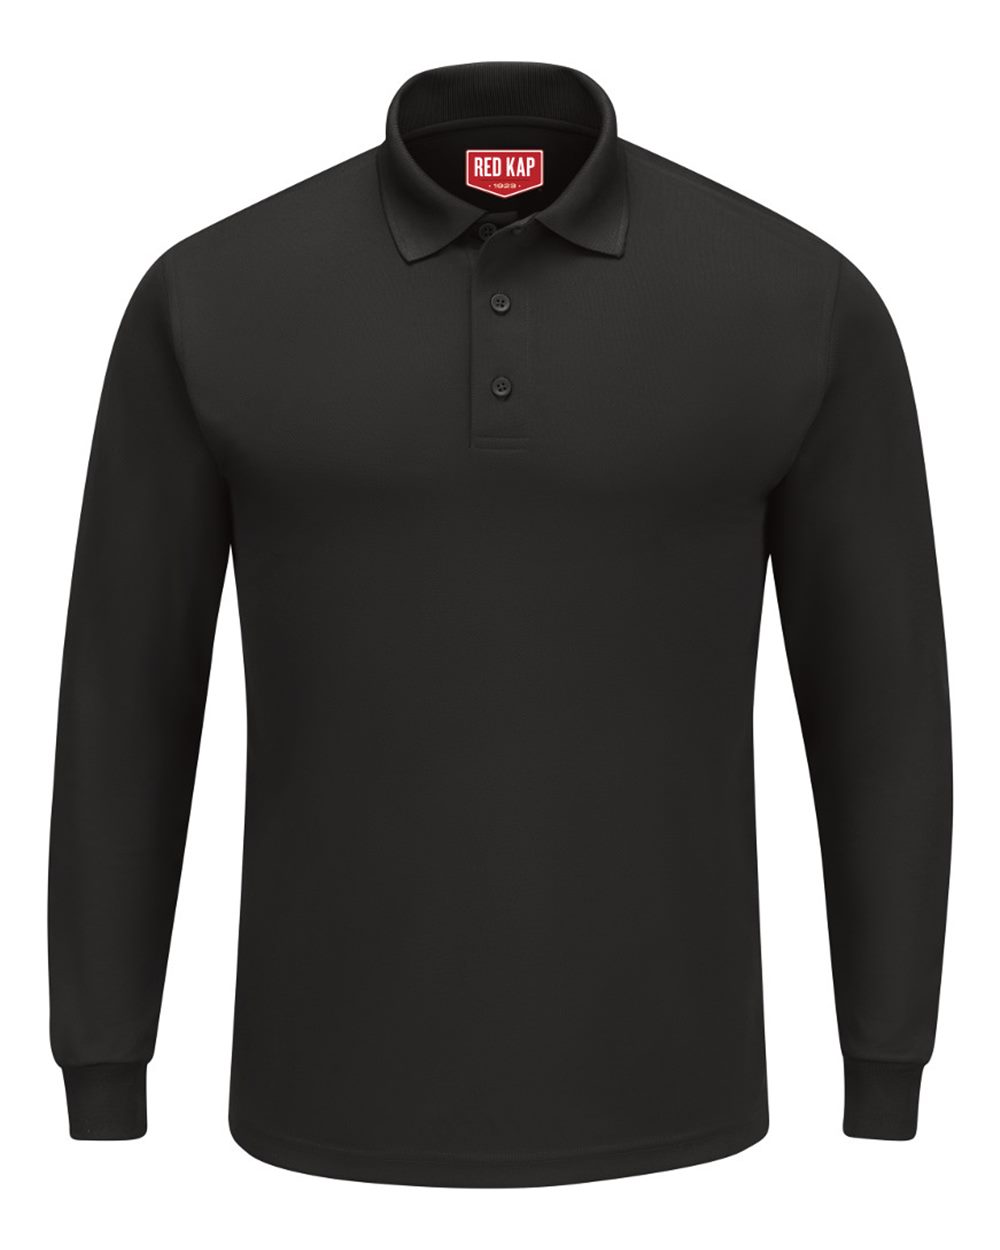 19530 Long Sleeve Performance Knit Polo - SK6L